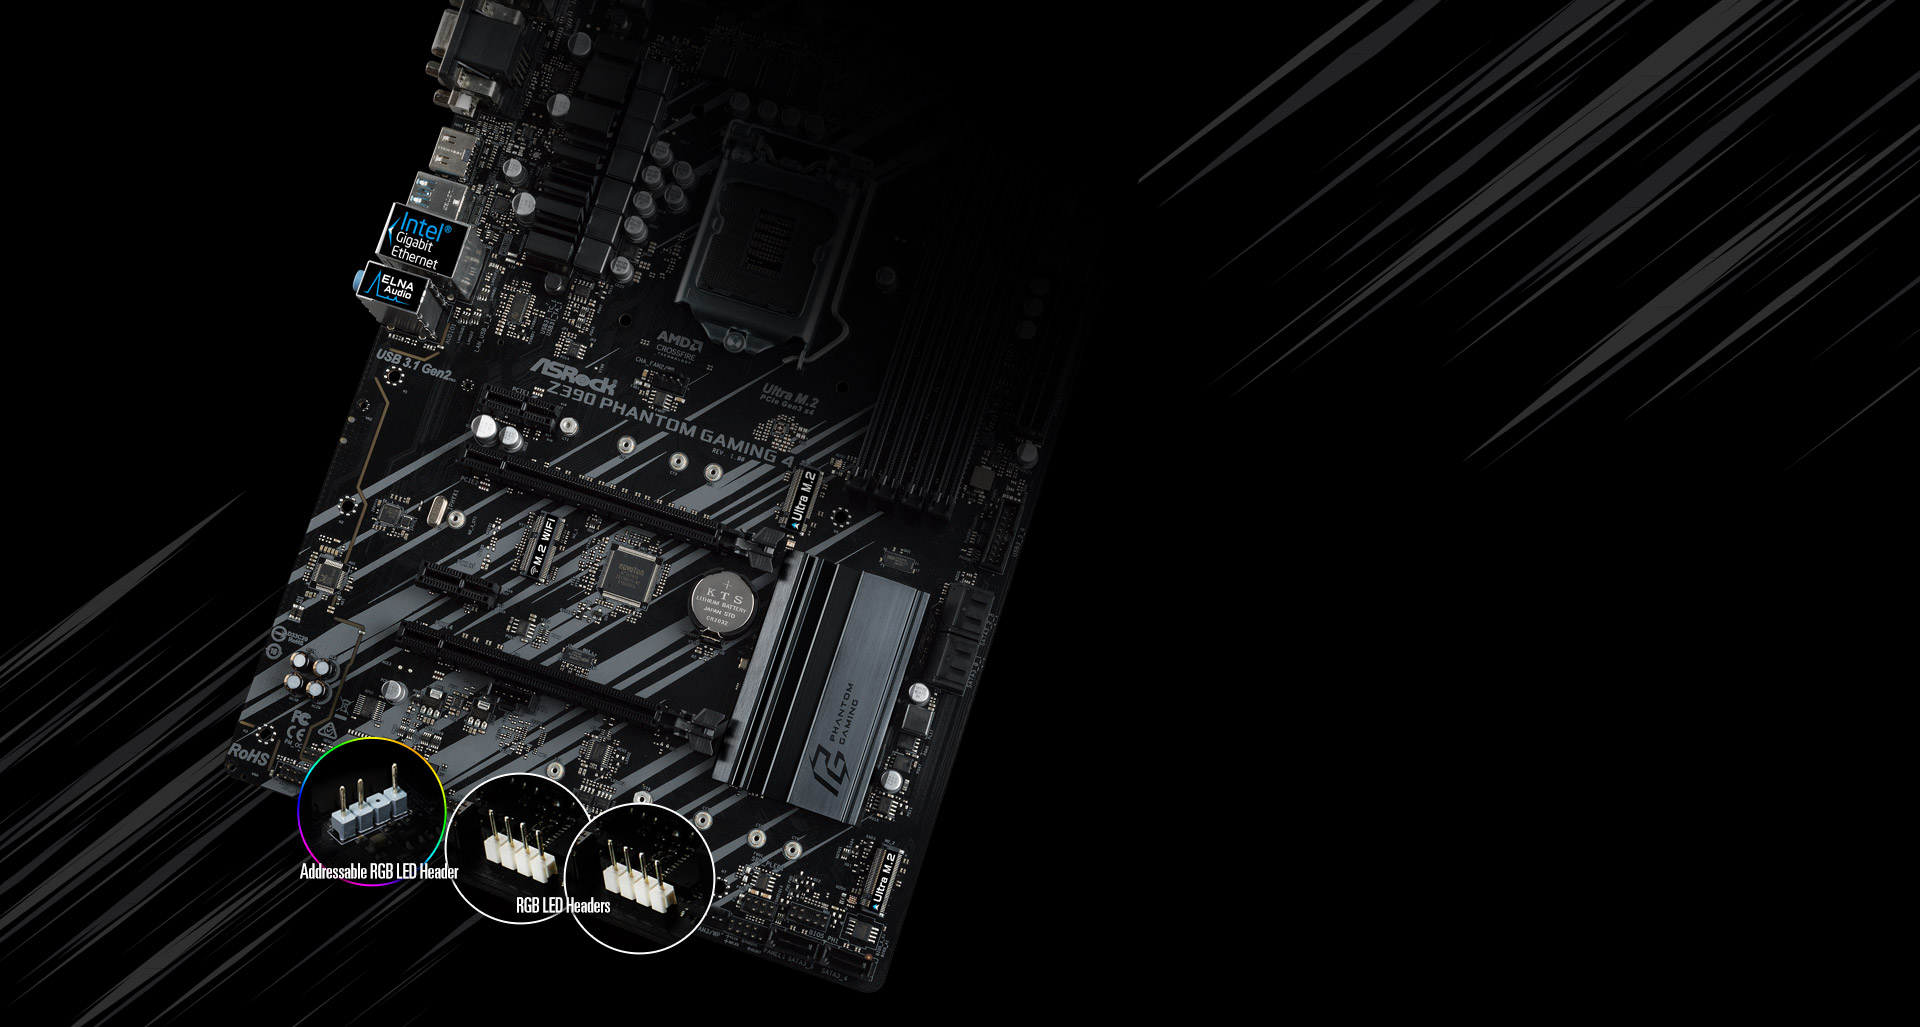 ASRock z390 motherboard angled up to the left, with hotspots on the adressable rgb led header and two rgb led headers